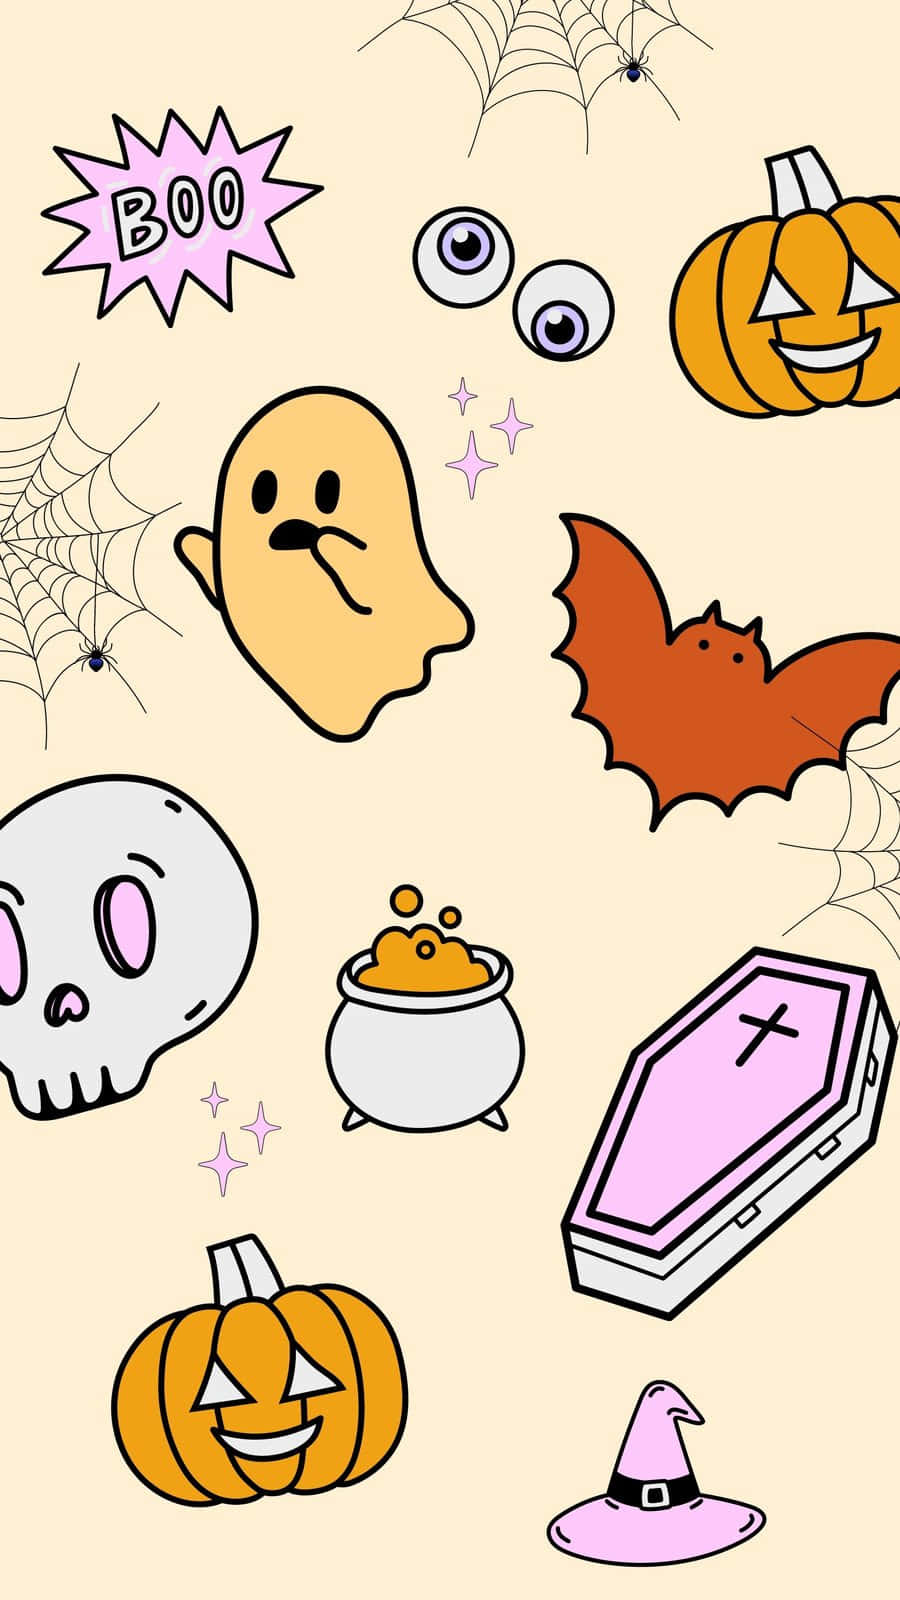 Get in the Halloween spirit with this cute wallpaper for your iPhone.